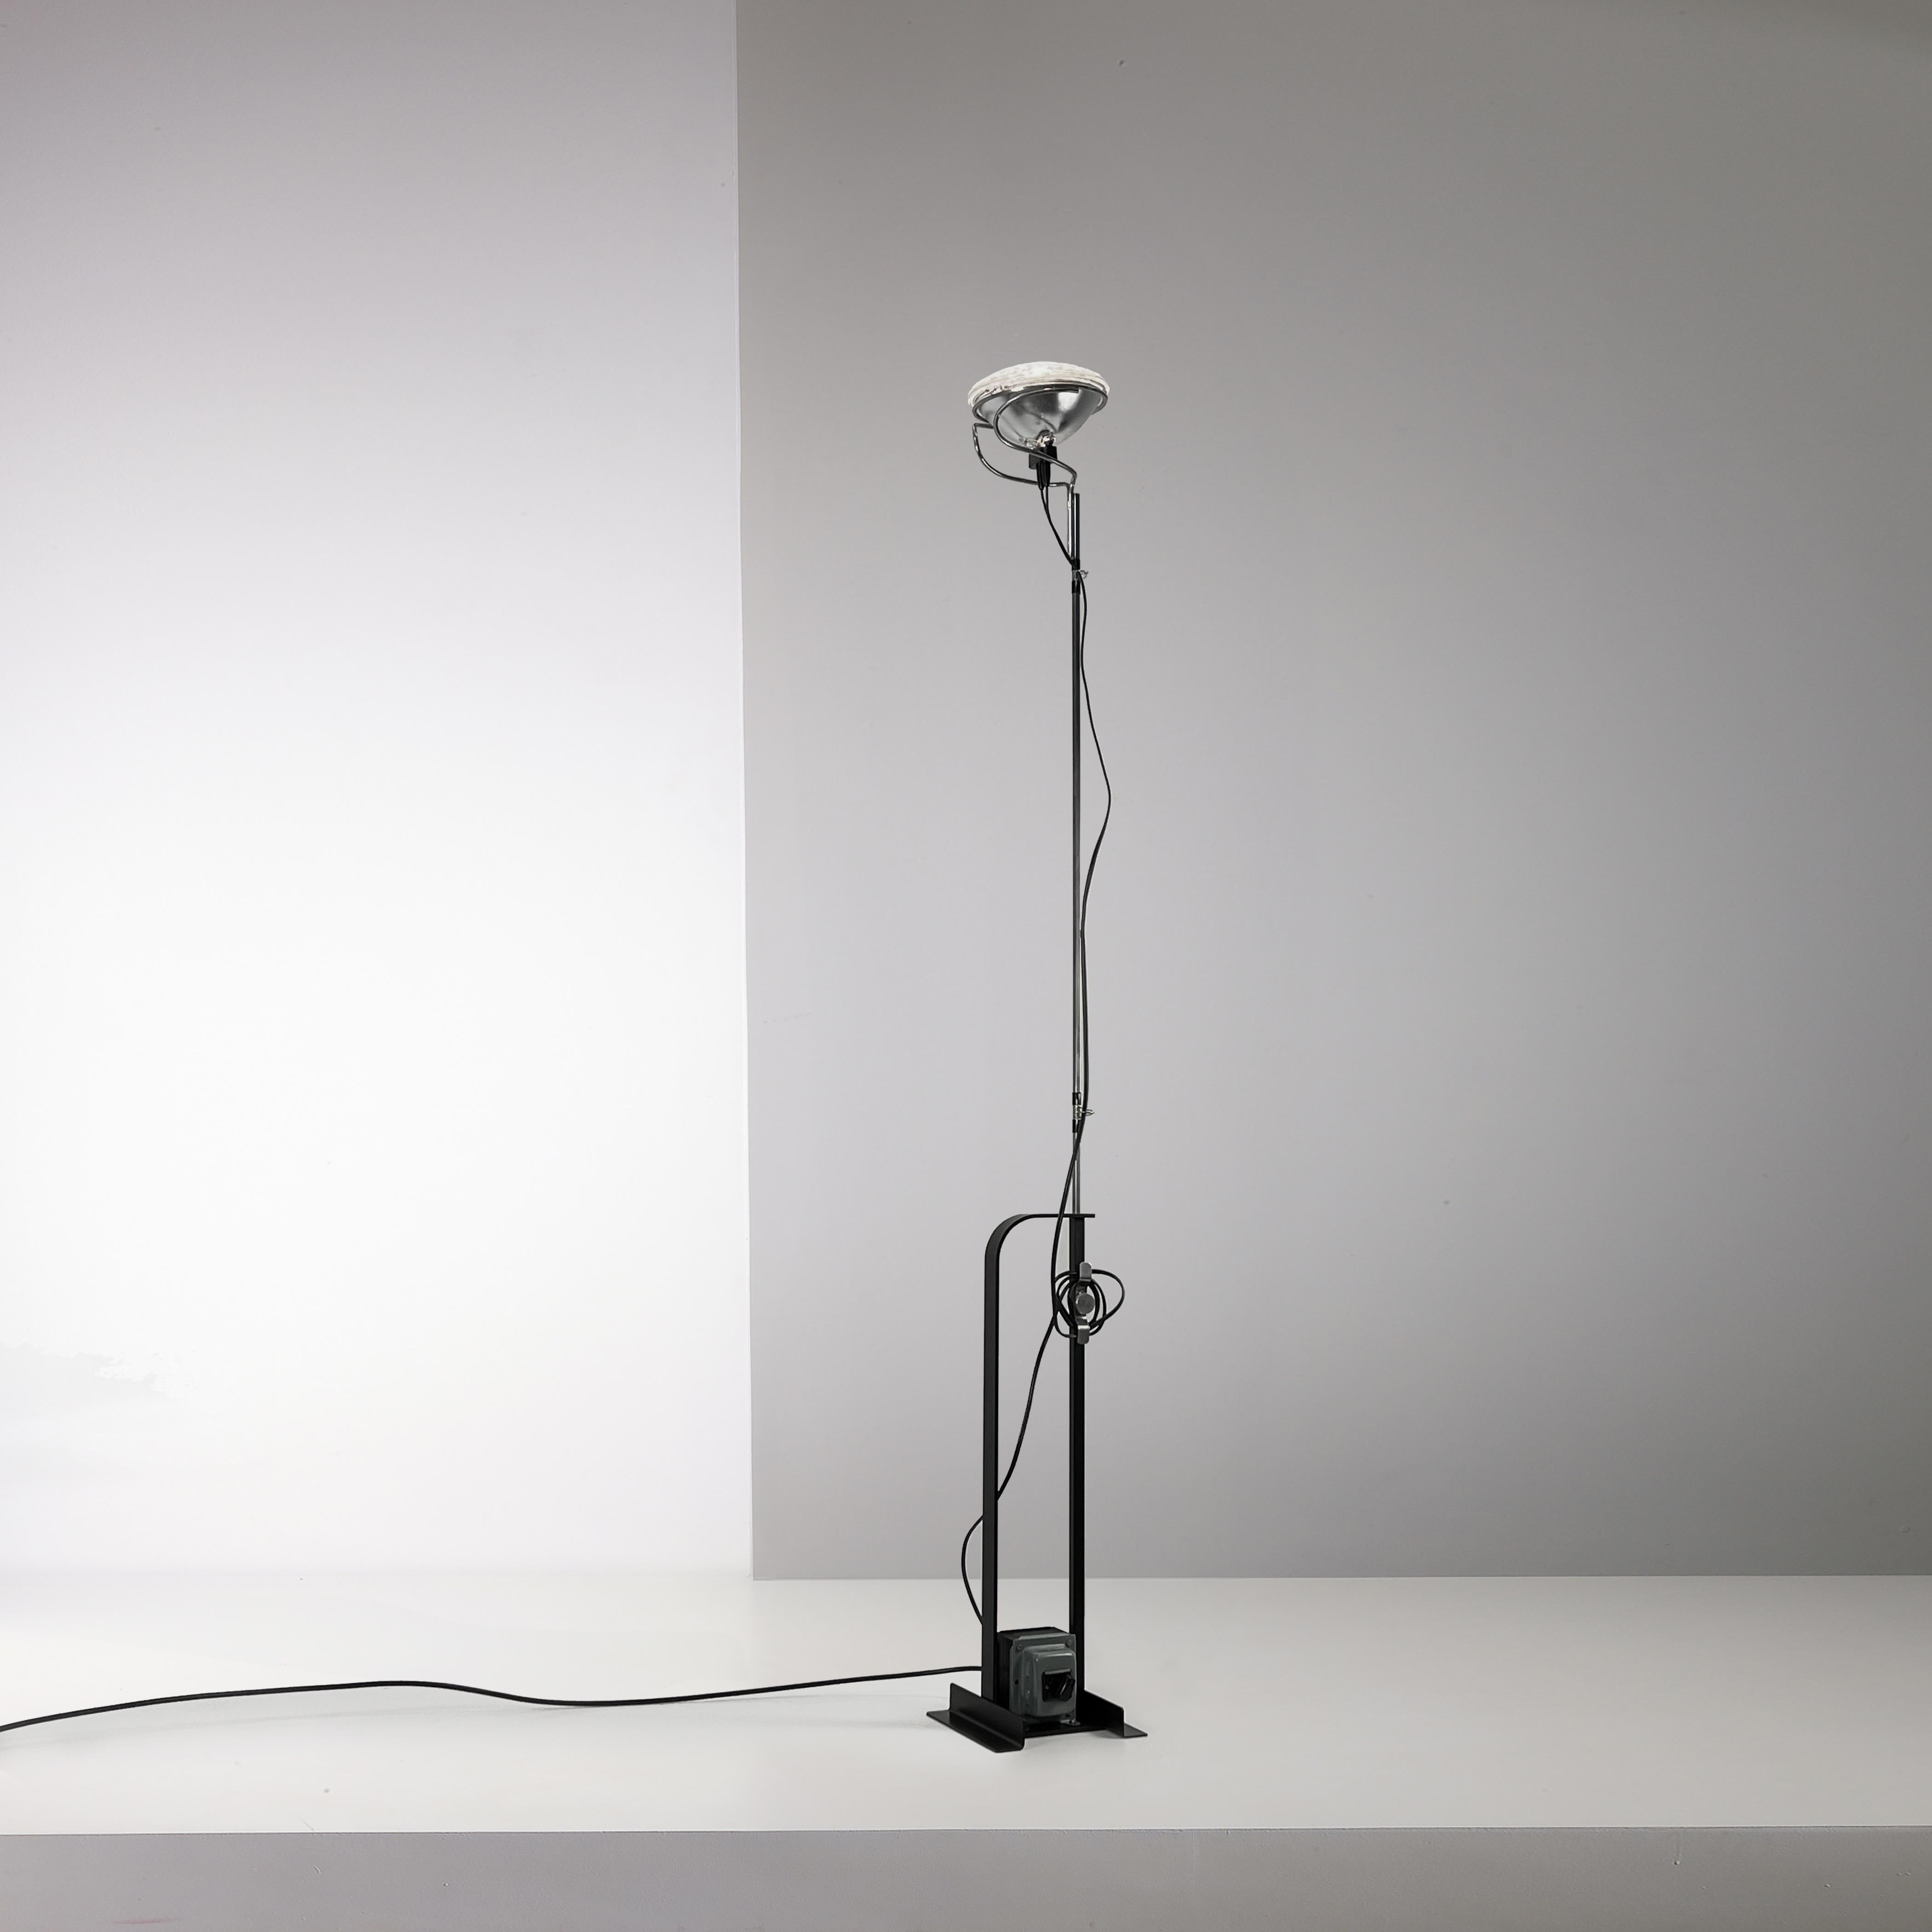 This matte black Toio lamp designed by Achille Castiglioni for Flos is a rare First Edition from 1962

The lamp exhibits a splendid patina throughout all its parts. Every component is operational, including the transformer.